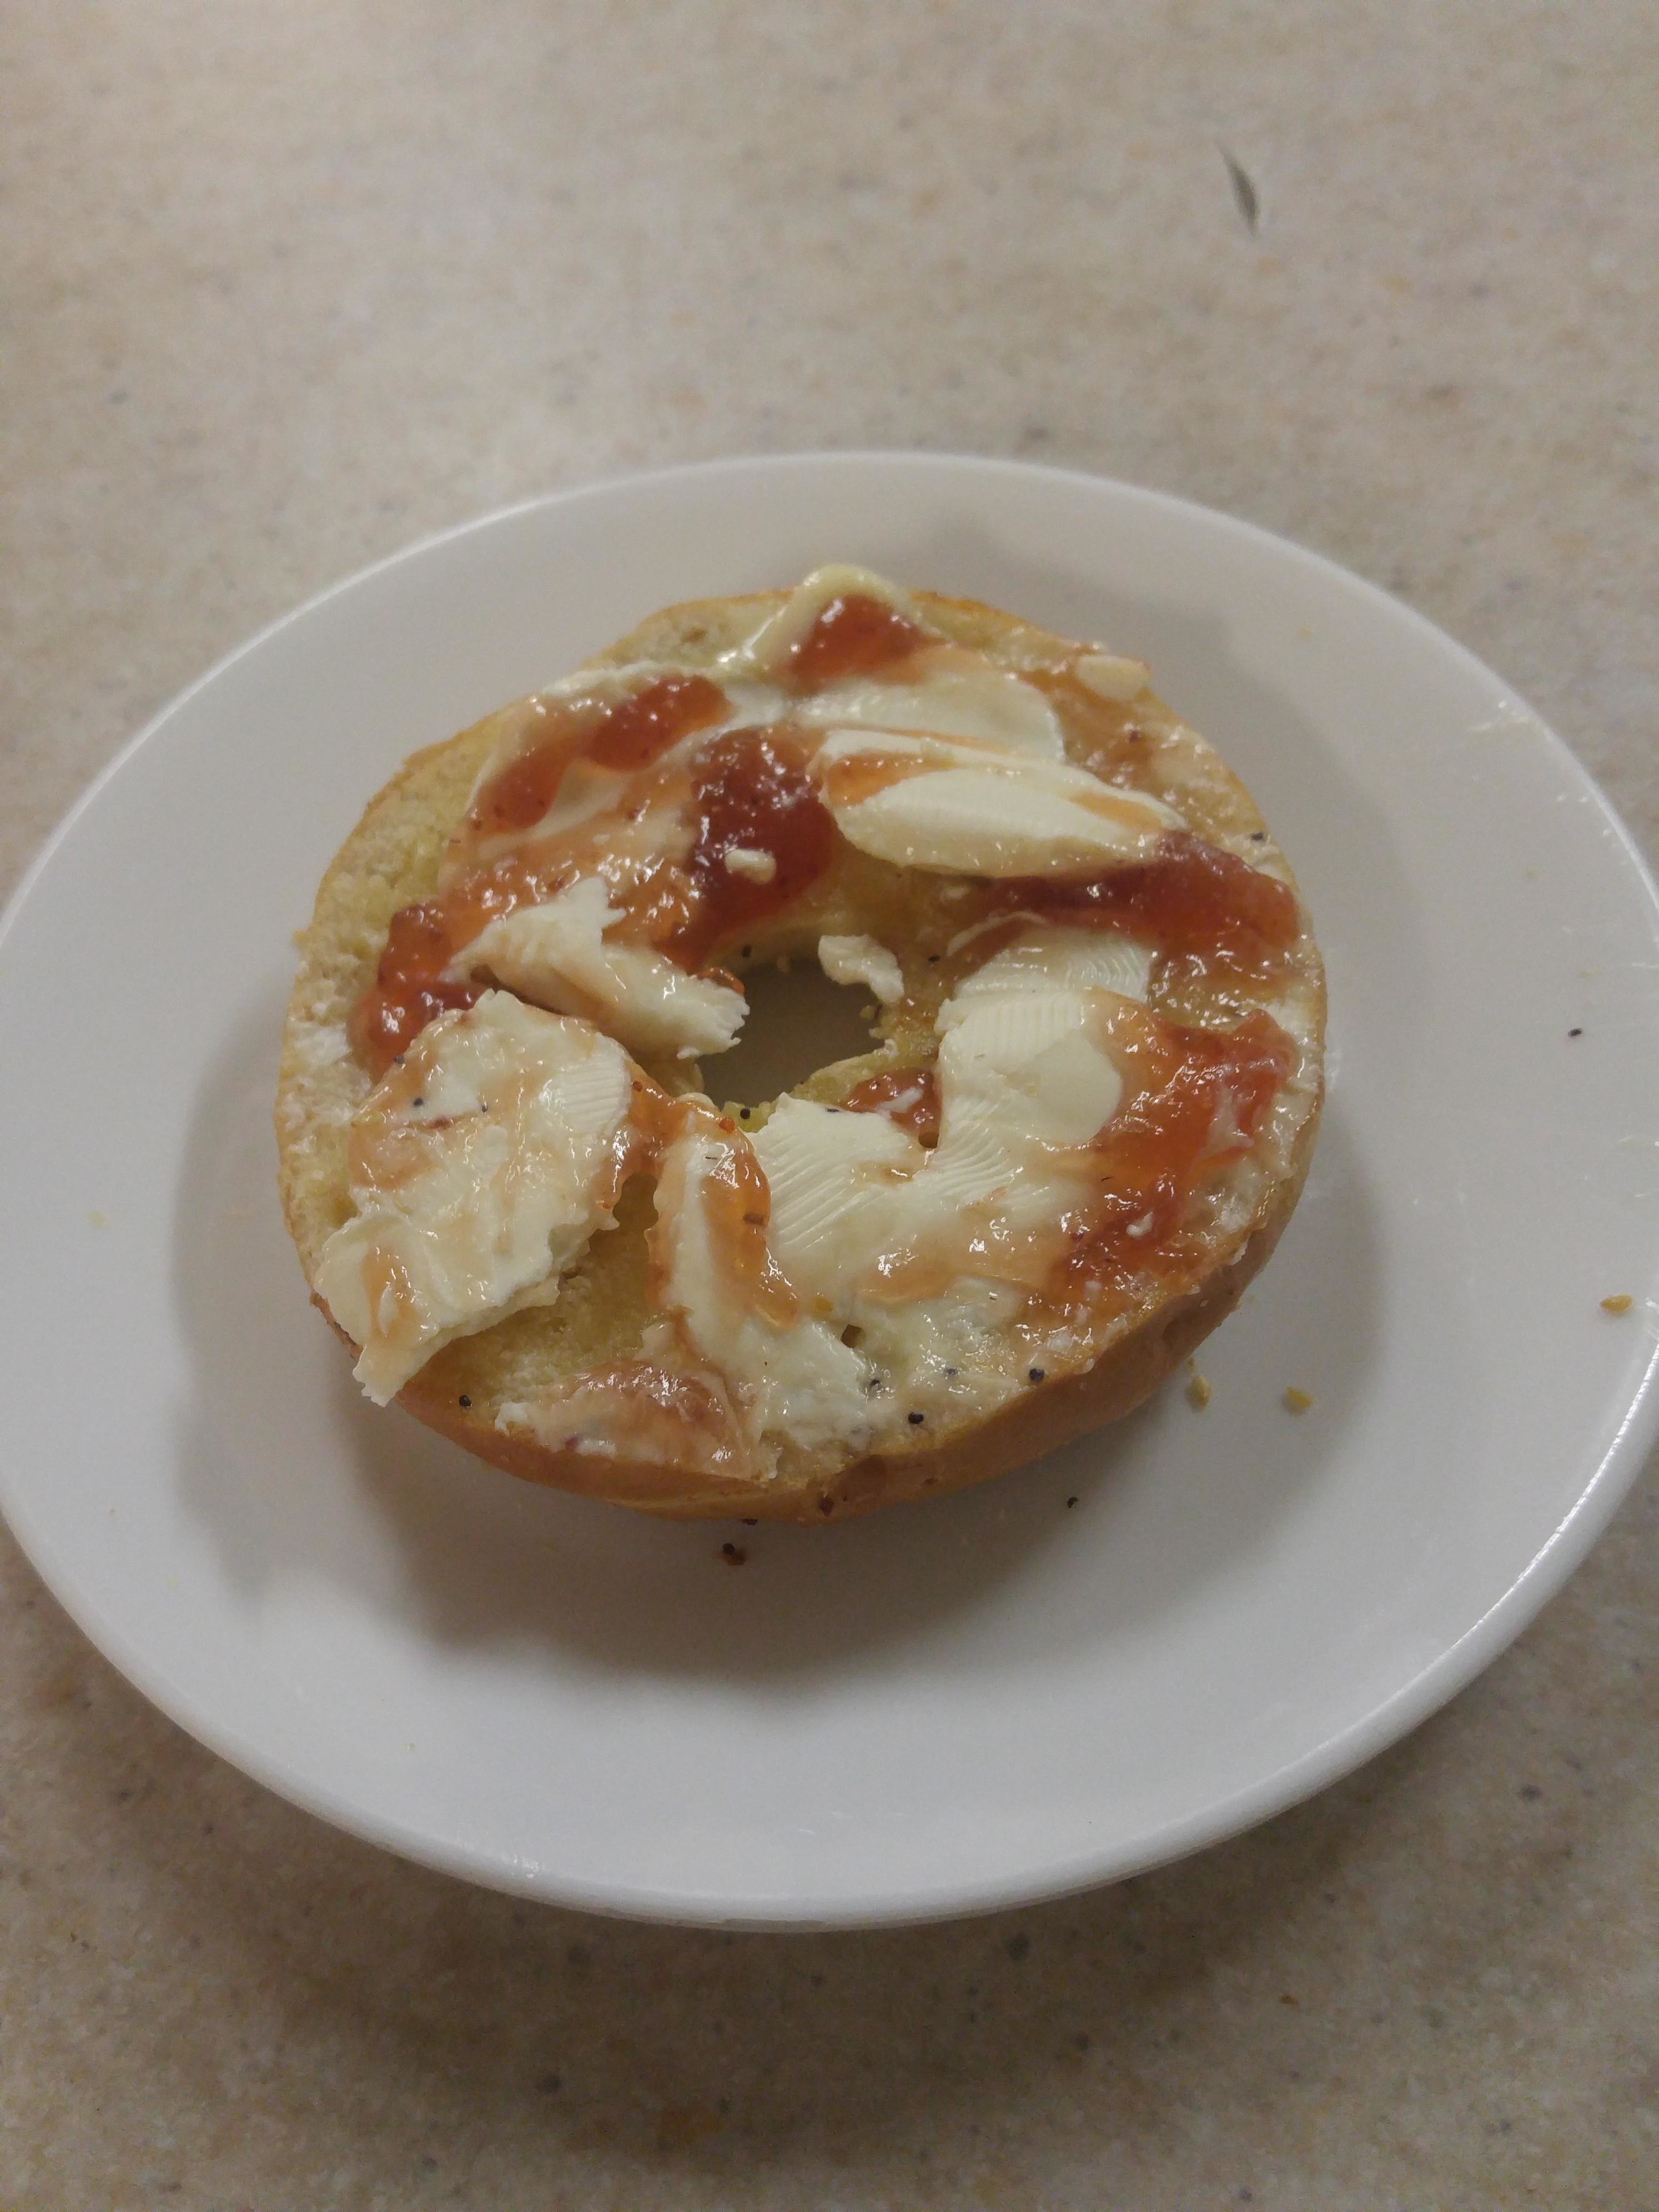 A bagel with cream cheese and jelly.